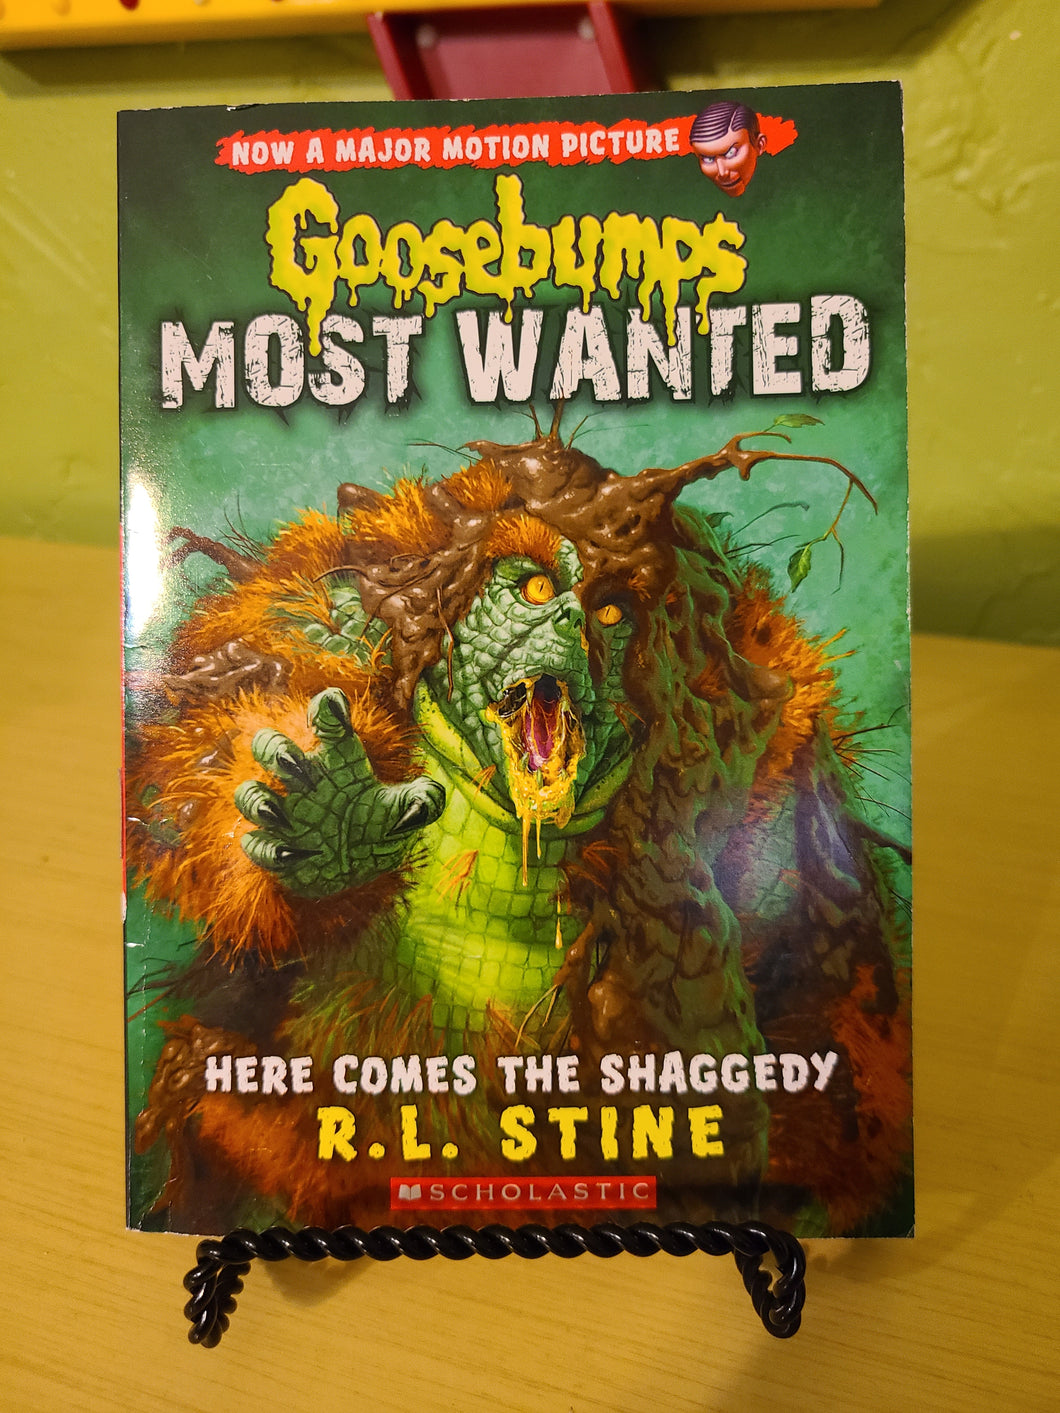 Goosebumps: Most Wanted #9 - Here Comes the Shaggedy